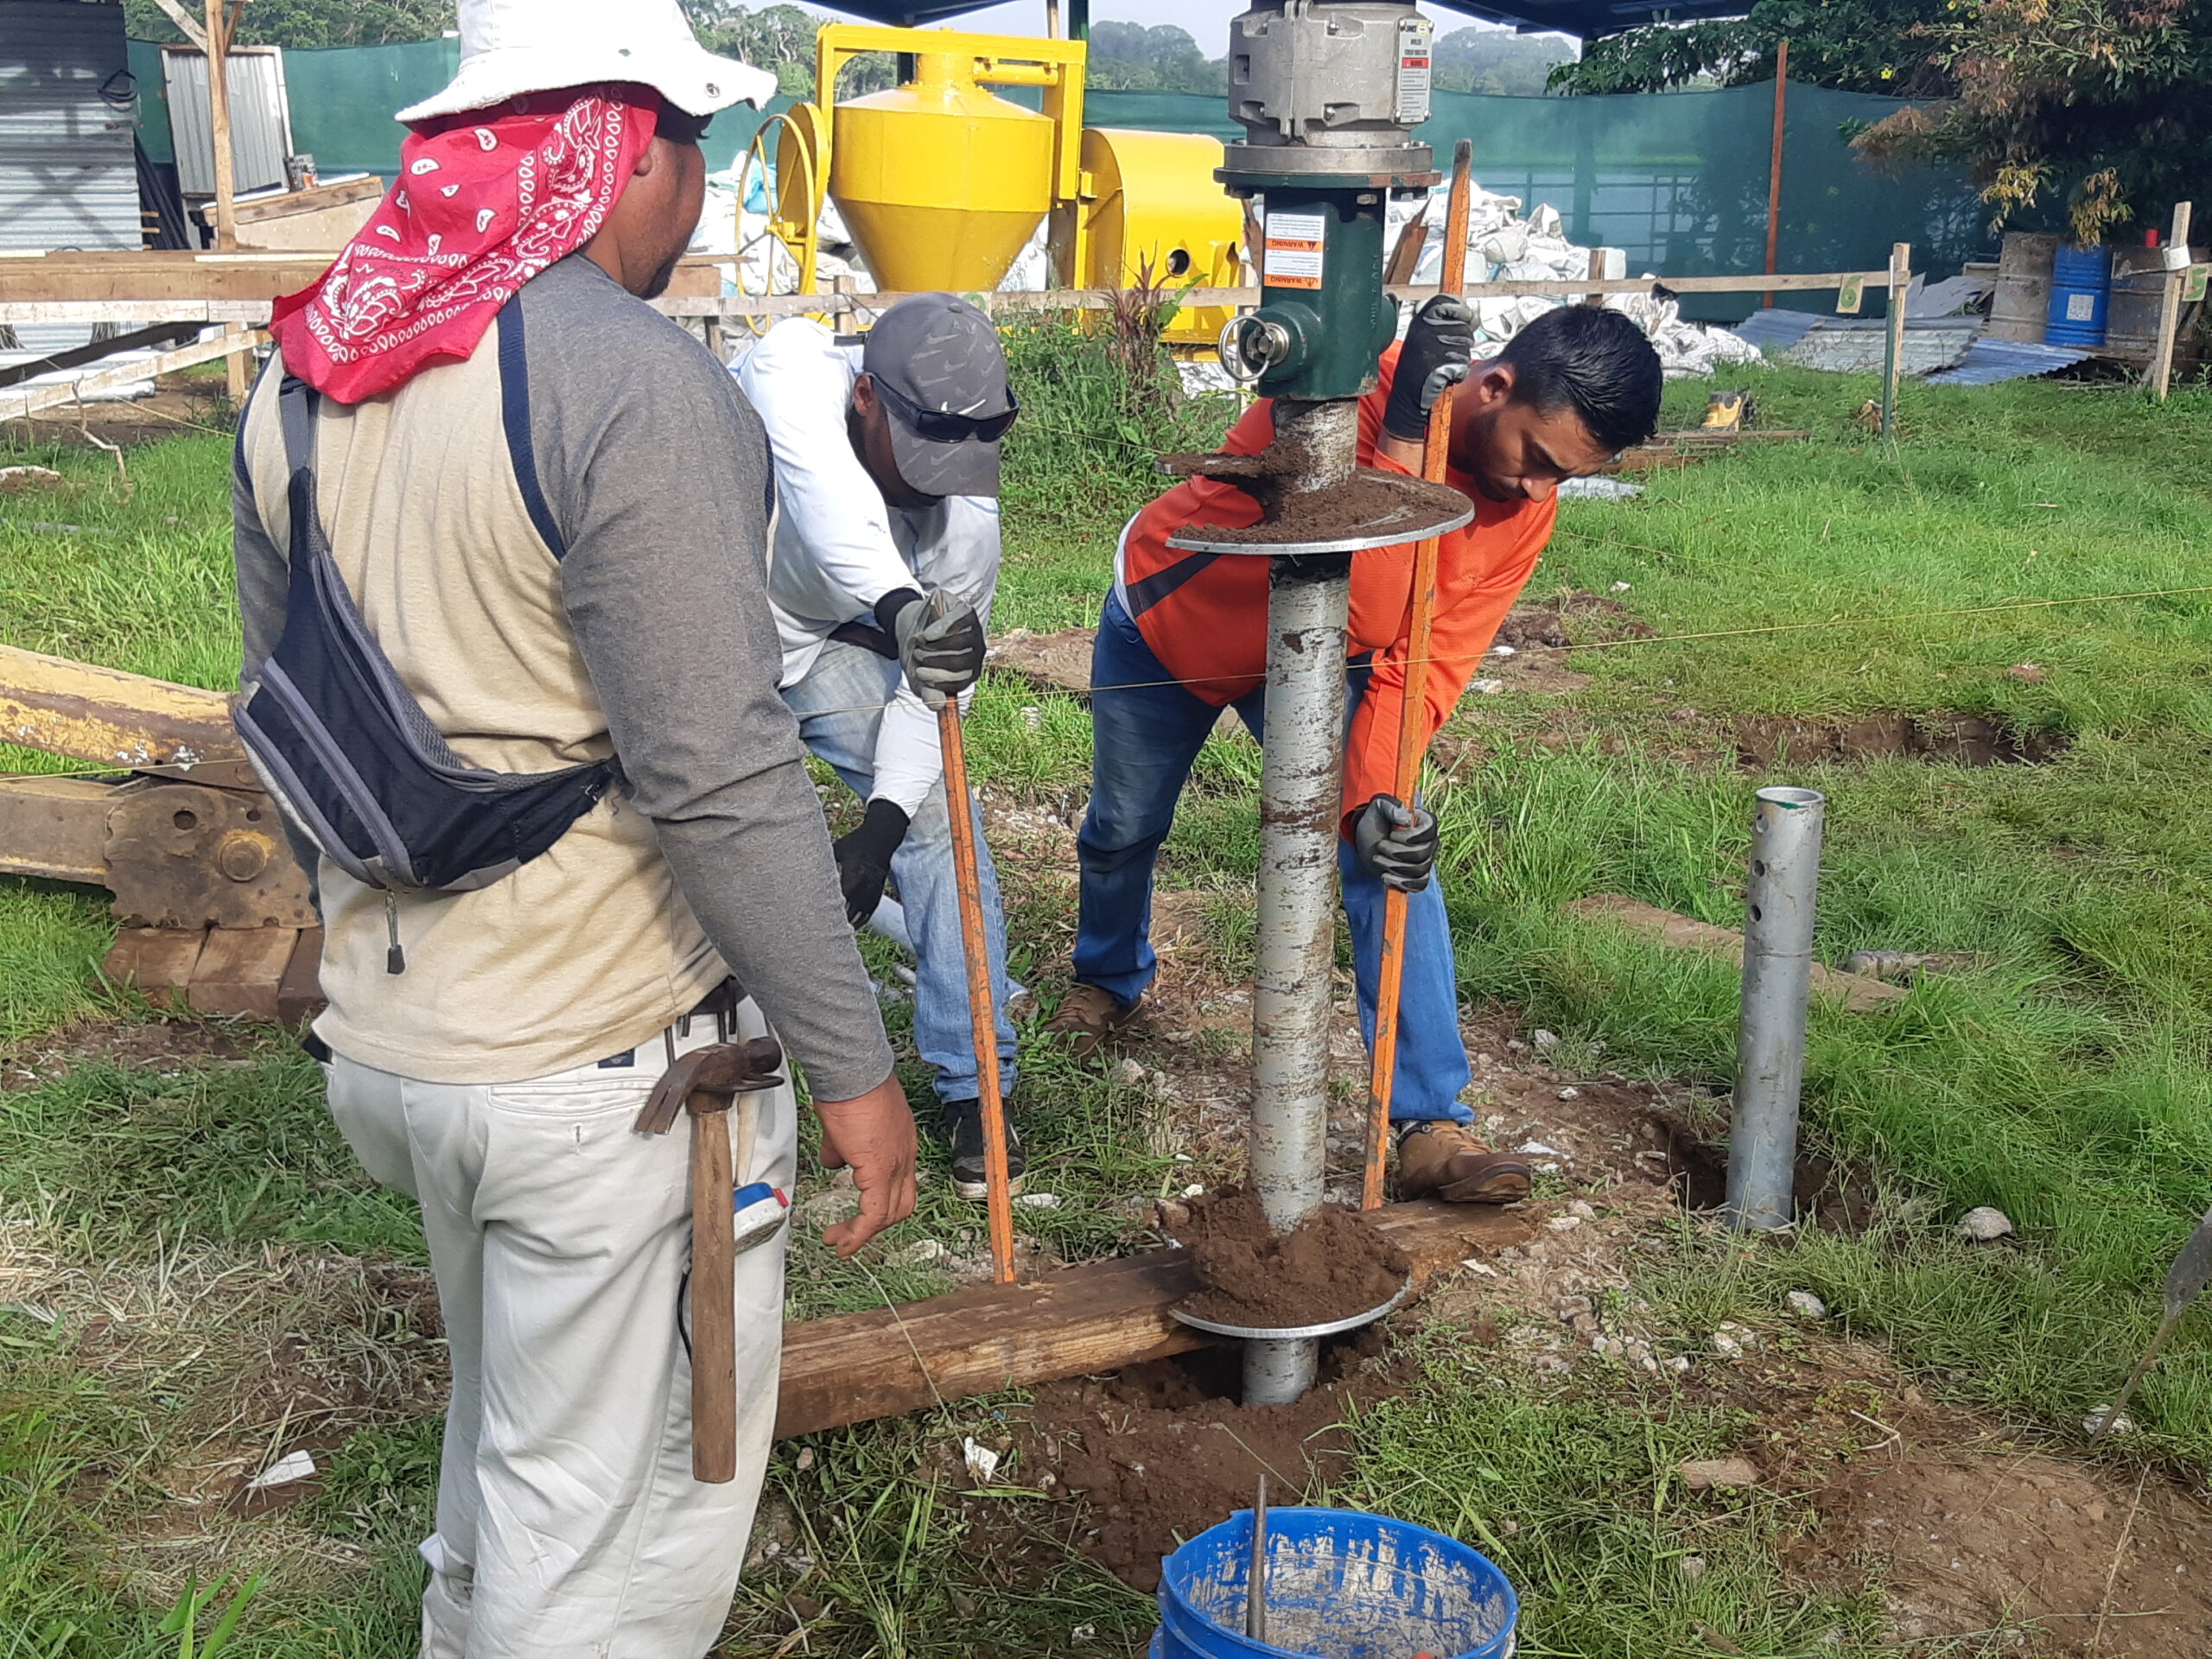 Helical Foundation digging with drill